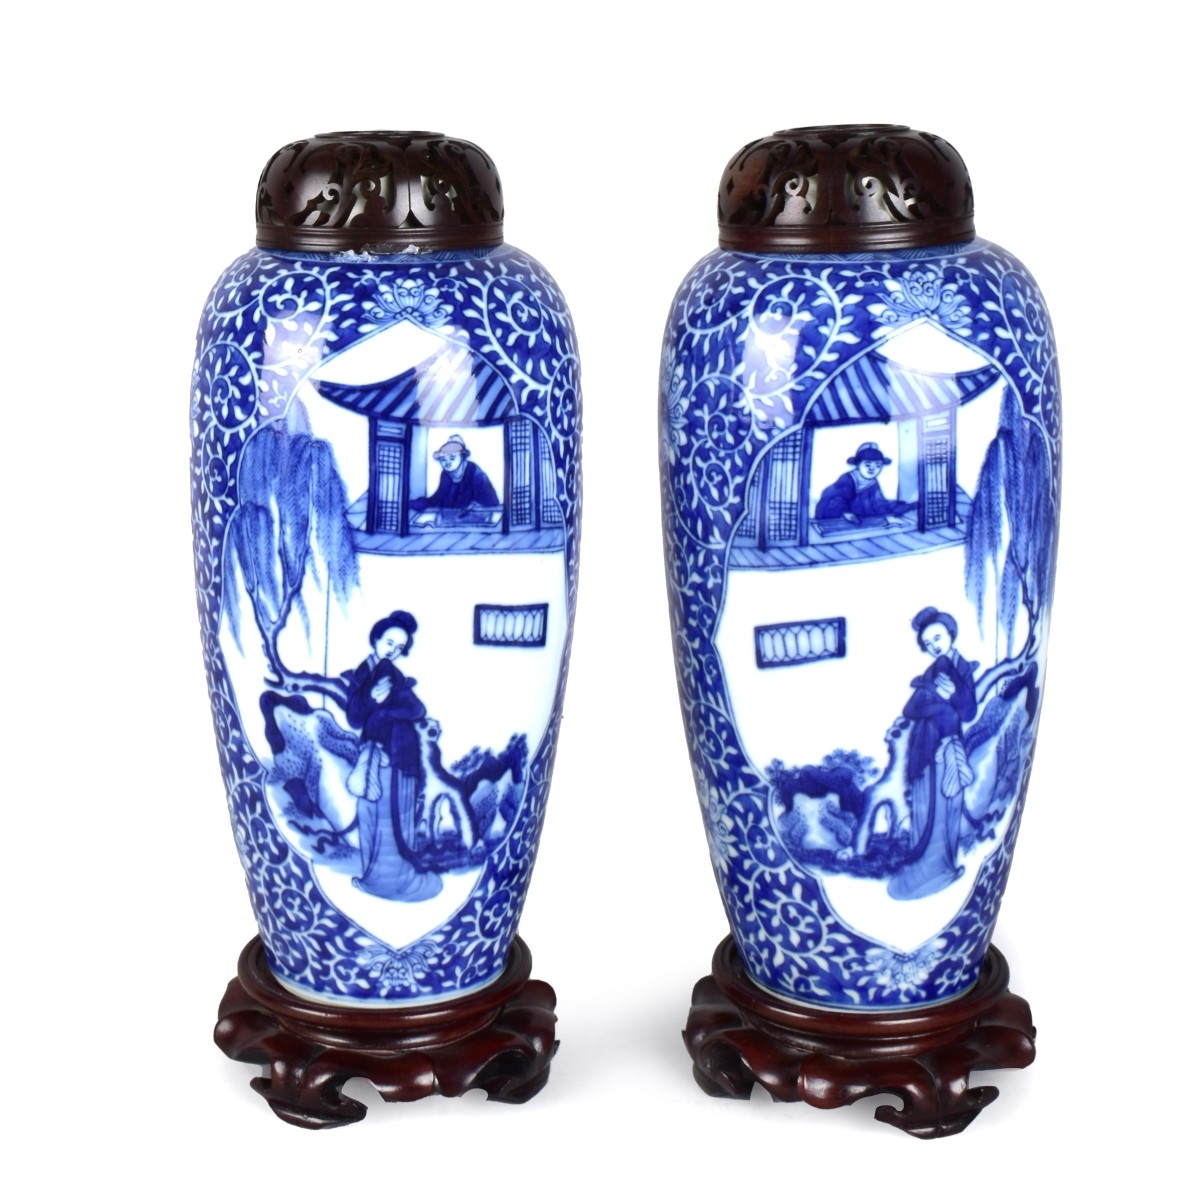 Pair of Chinese Covered Vases